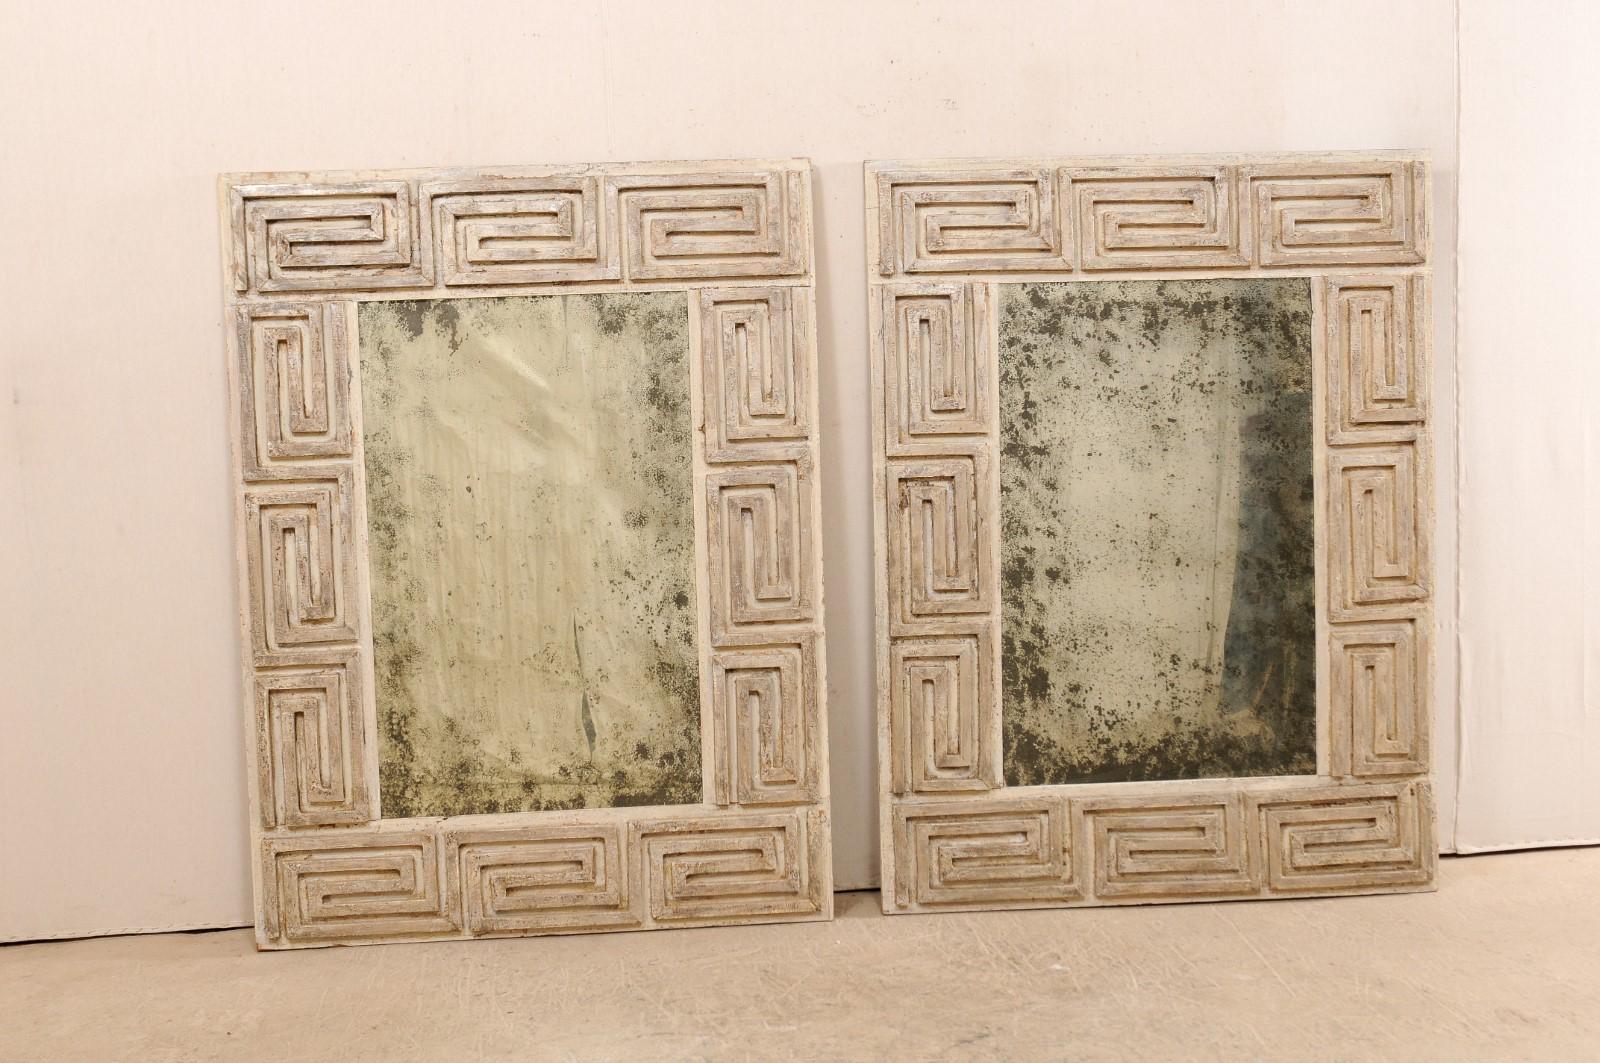 A pair of Greek key designed carved and painted wood mirrors from the 20th century. These antique mirrors, made in America, feature a thick, rectangular-shaped surround which is carved in Greek key design, with antiqued glass at each center. The